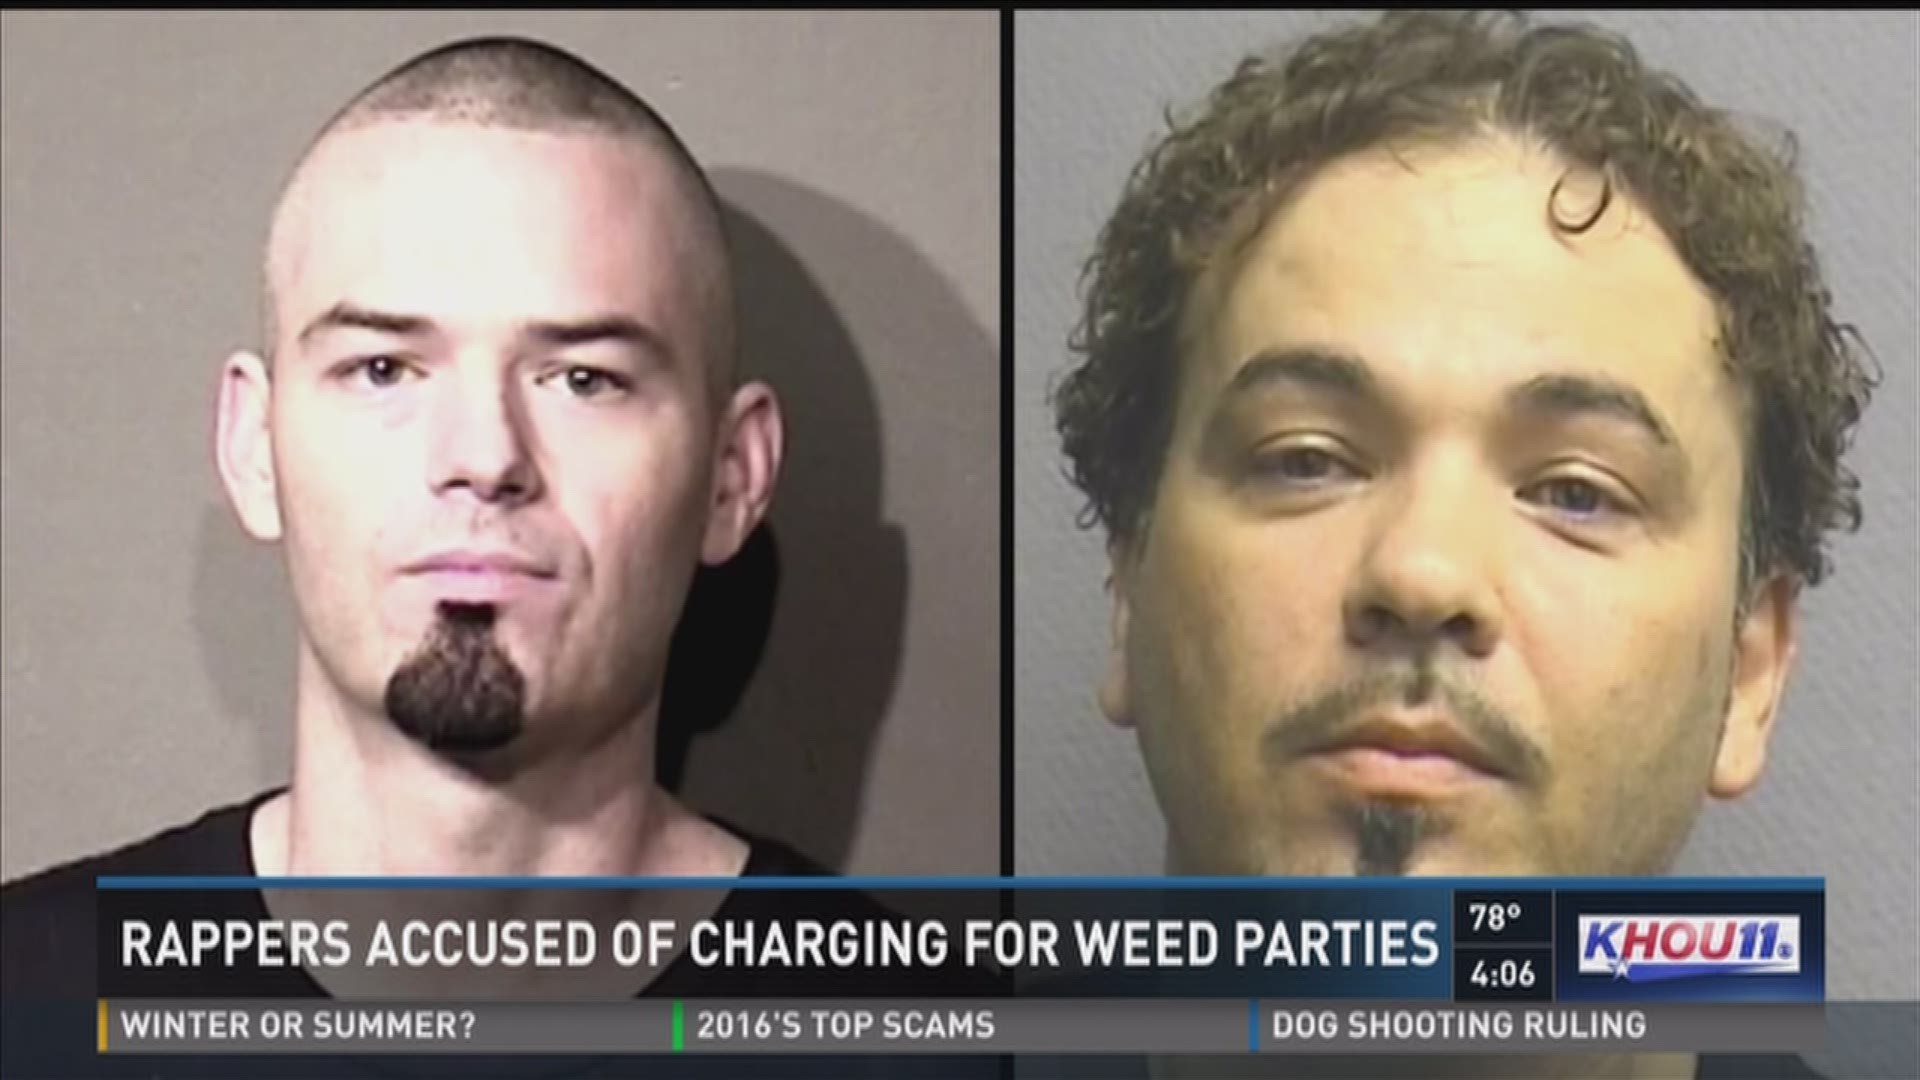 Prosecutors believe the rappers used Instagram to organize a "weed party".